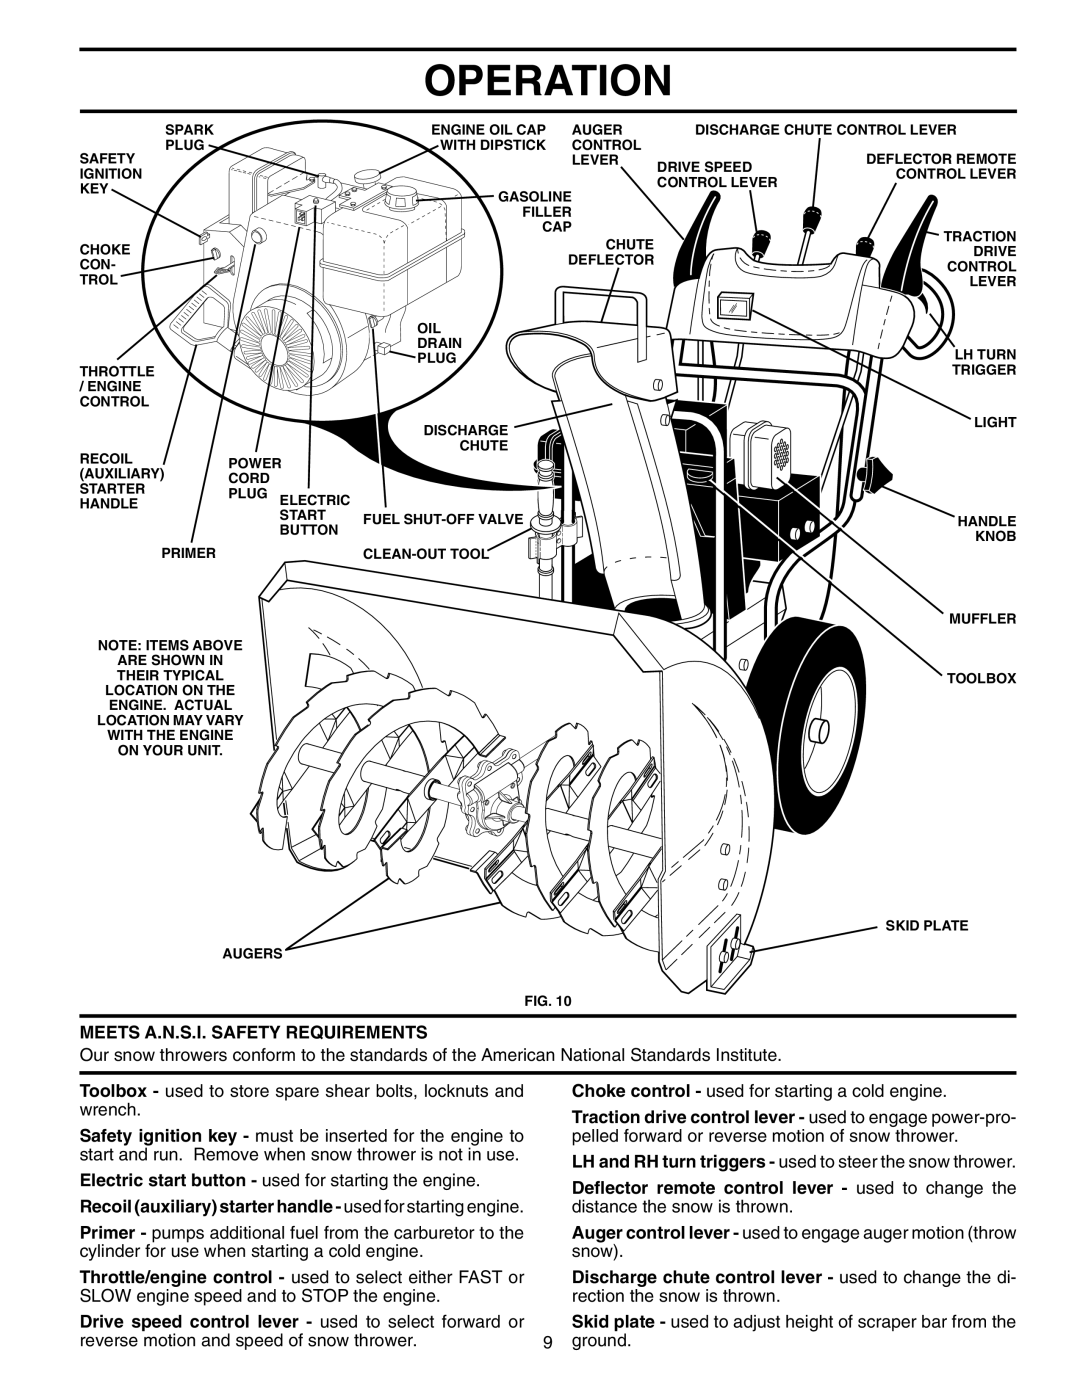 Husqvarna 10527SBE owner manual Operation, Meets A.N.S.I. Safety Requirements 